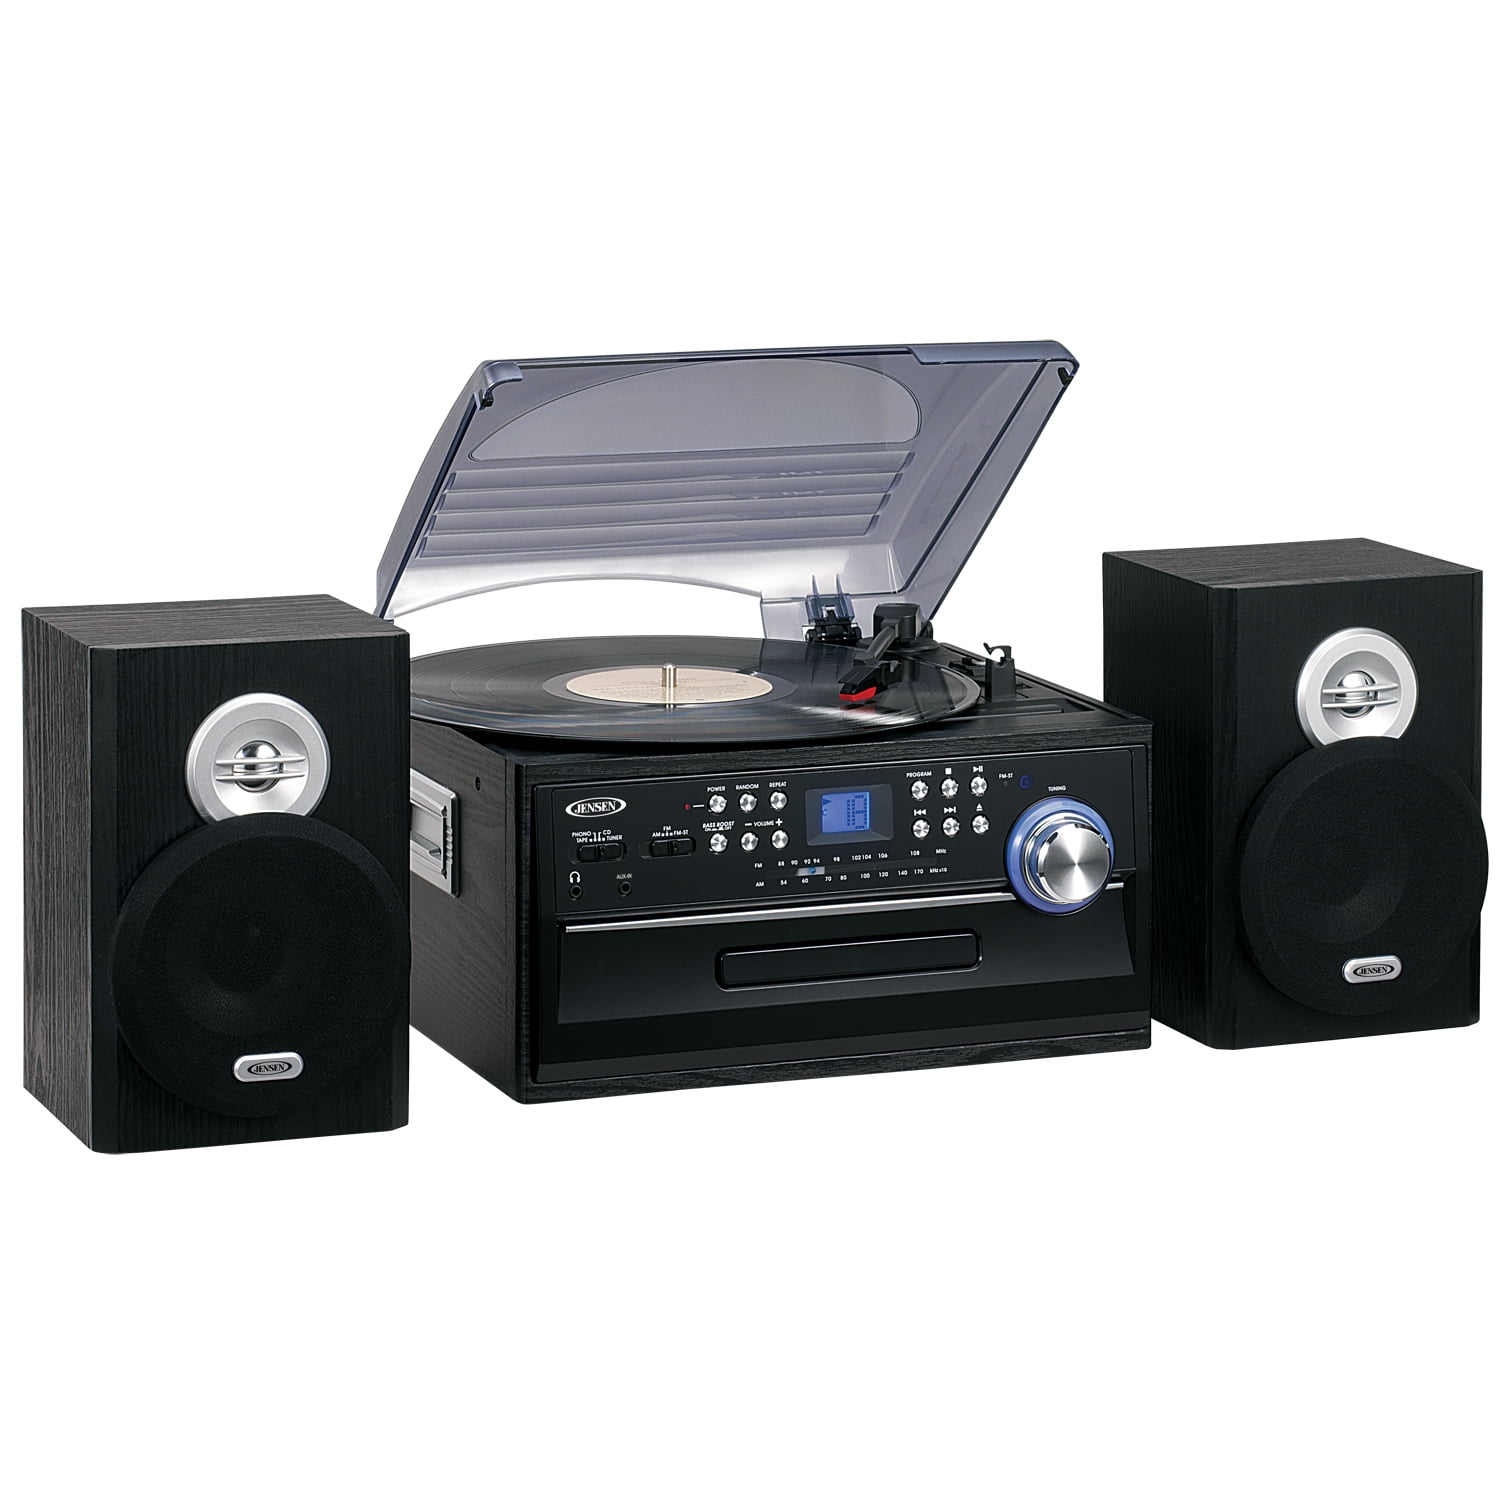 Cassette and AM/FM Stereo Radio Jensen JTA-475 3-Speed Turntable with CD 